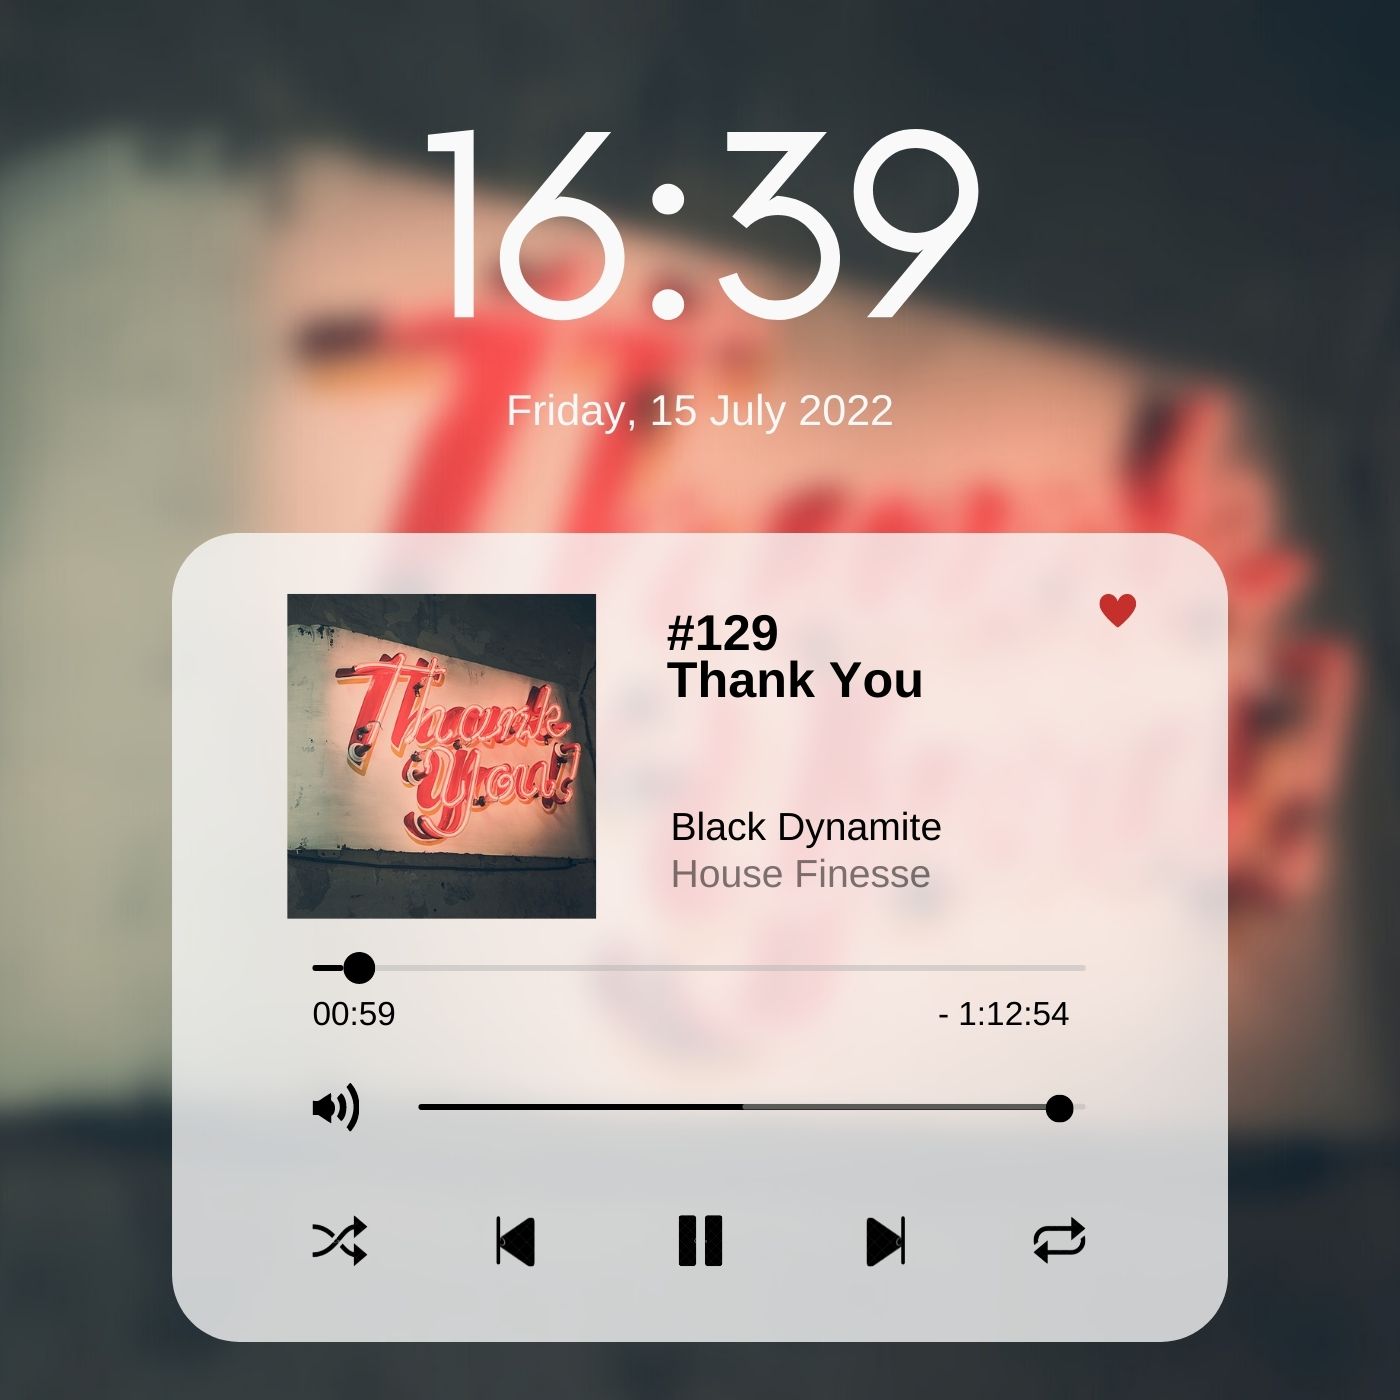 Thank You with Black Dynamite